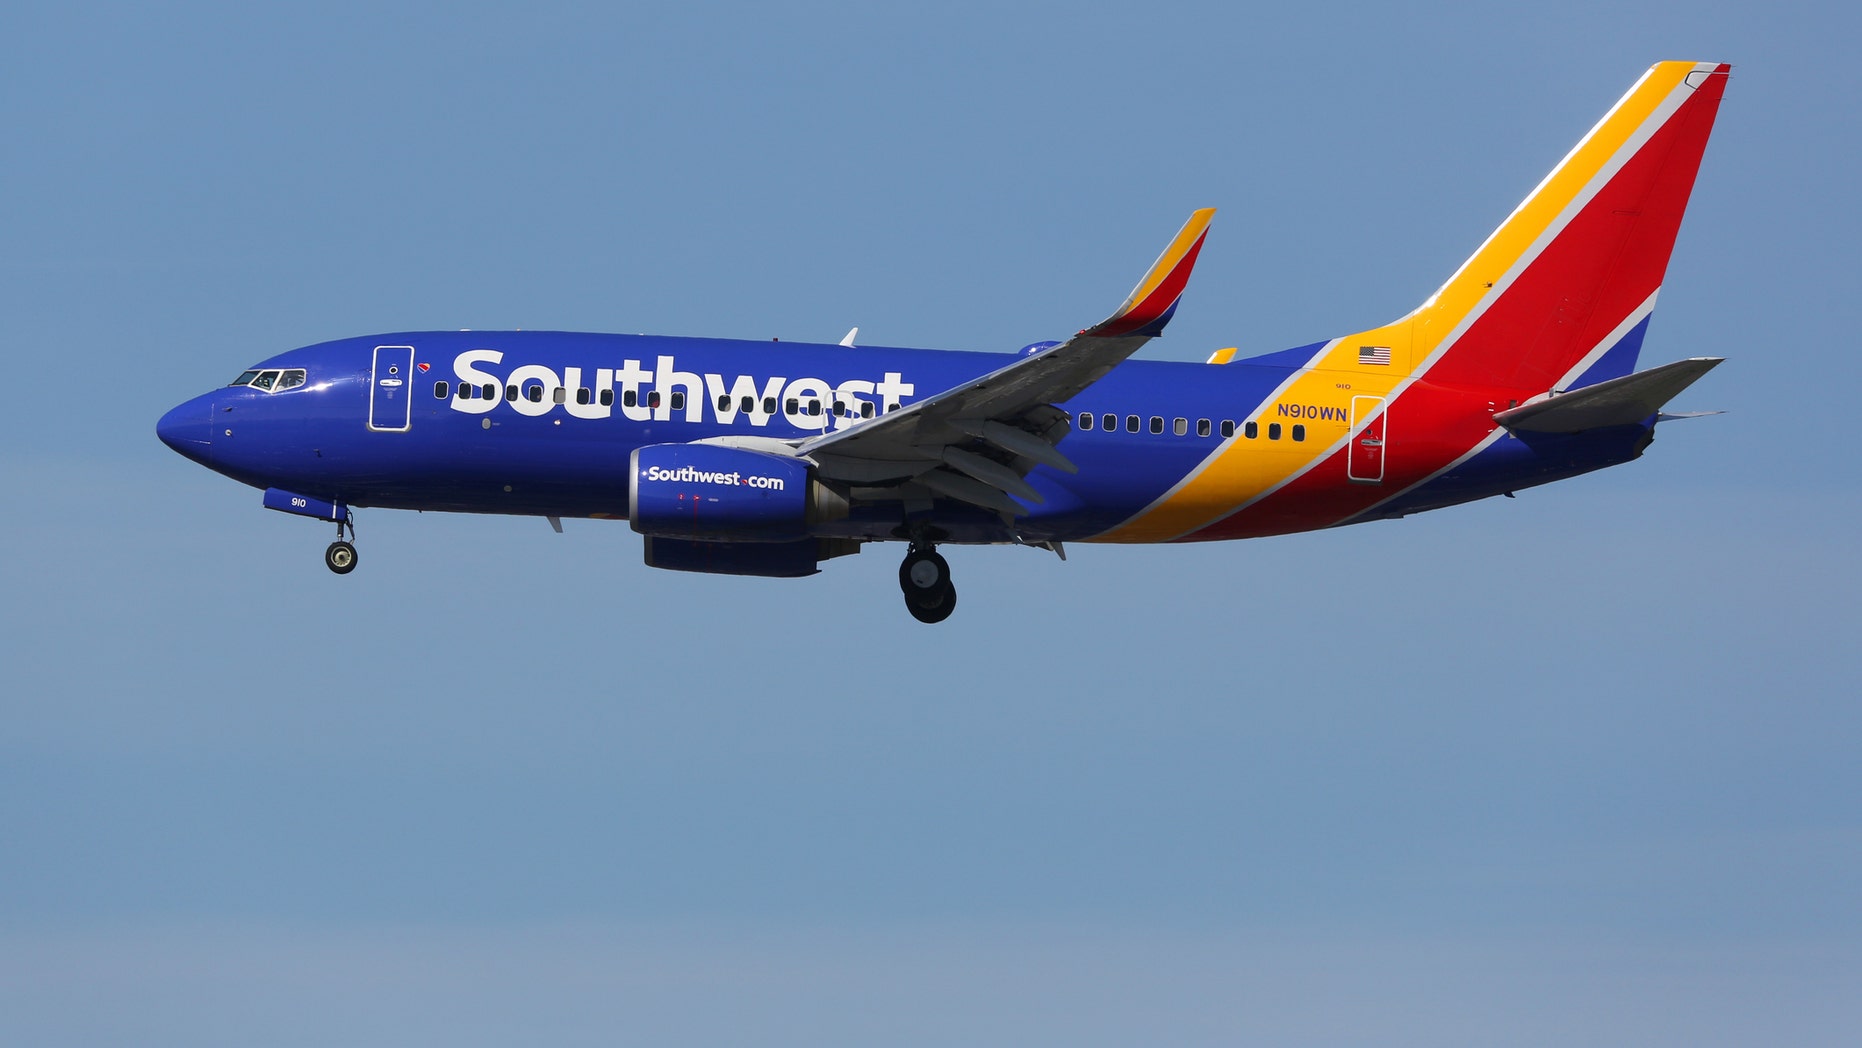 Southwest Airlines confirmed shortly afterward that itsÂ âairport technologyÂ systems are performing normallyÂ andÂ flights are boarding and departing.â